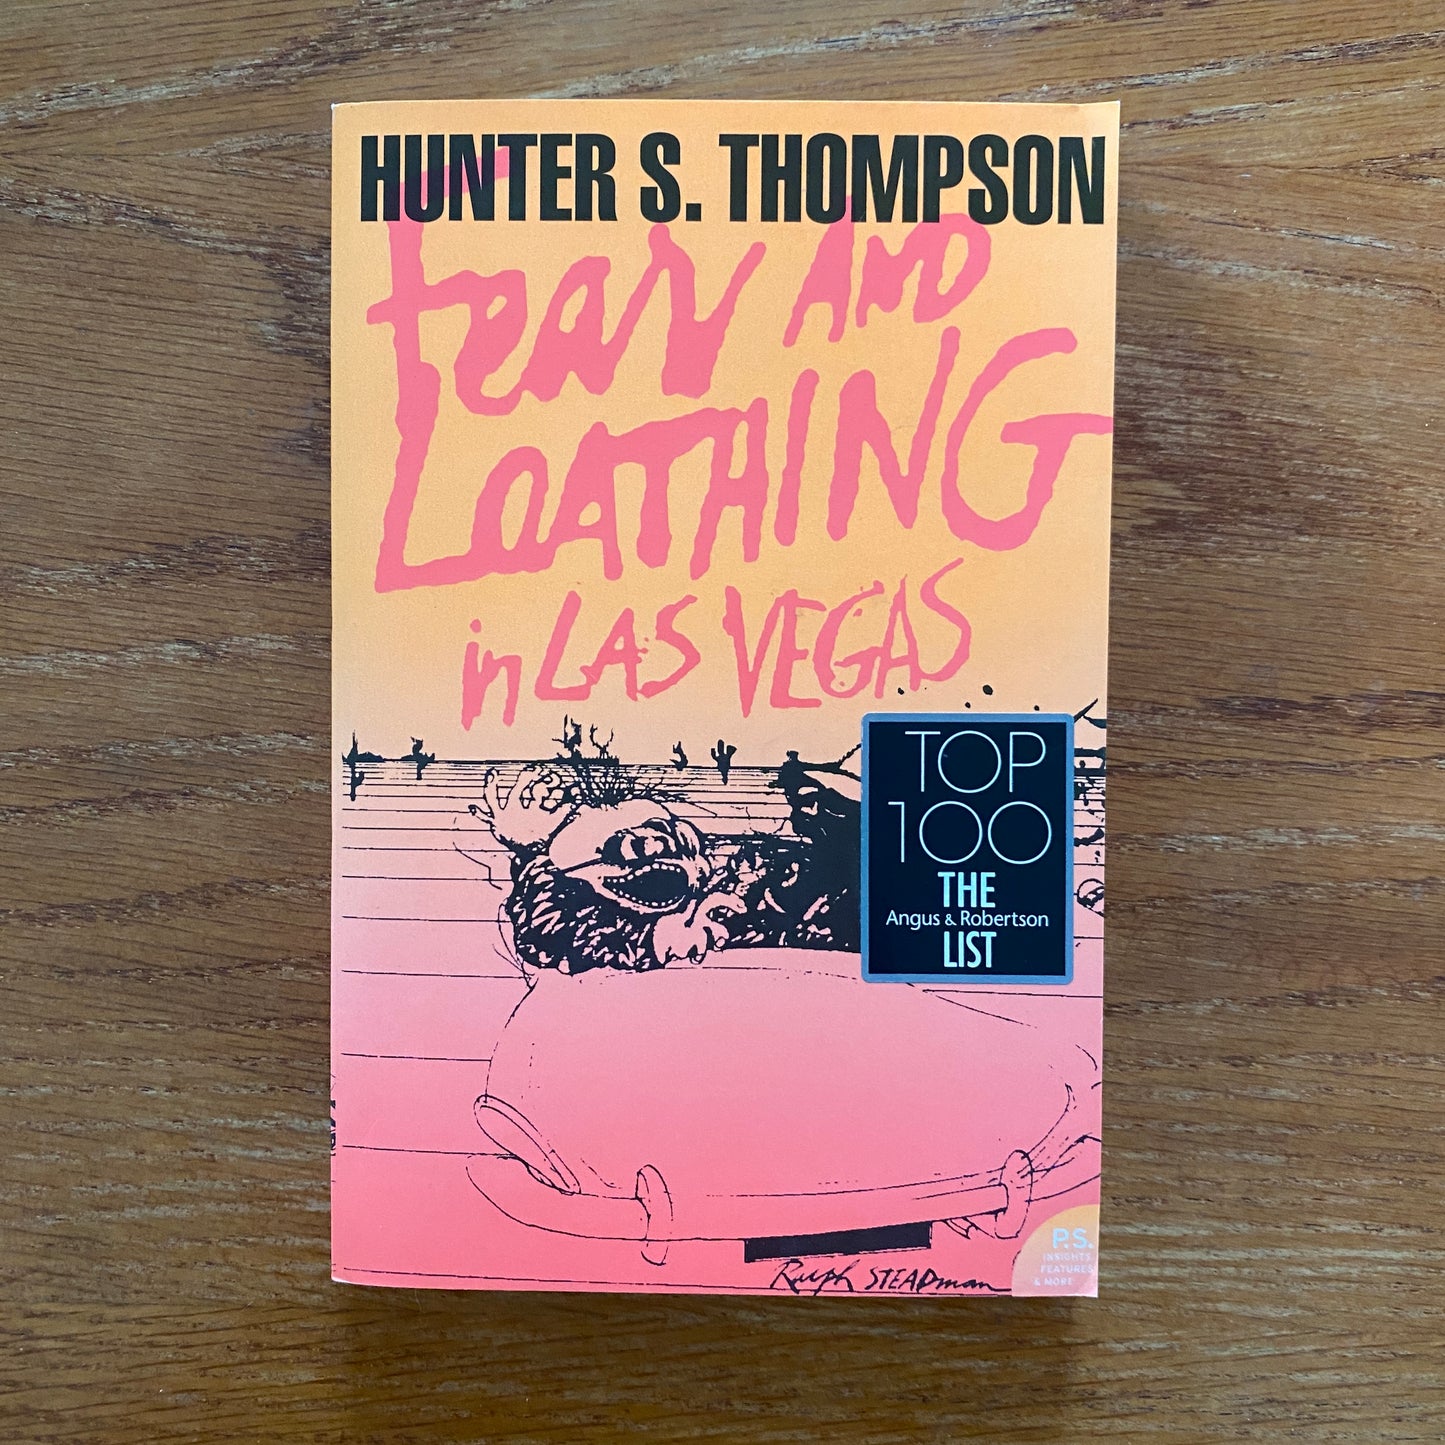 Hunter S. Thompson - Fear And Loathing Los Vegas